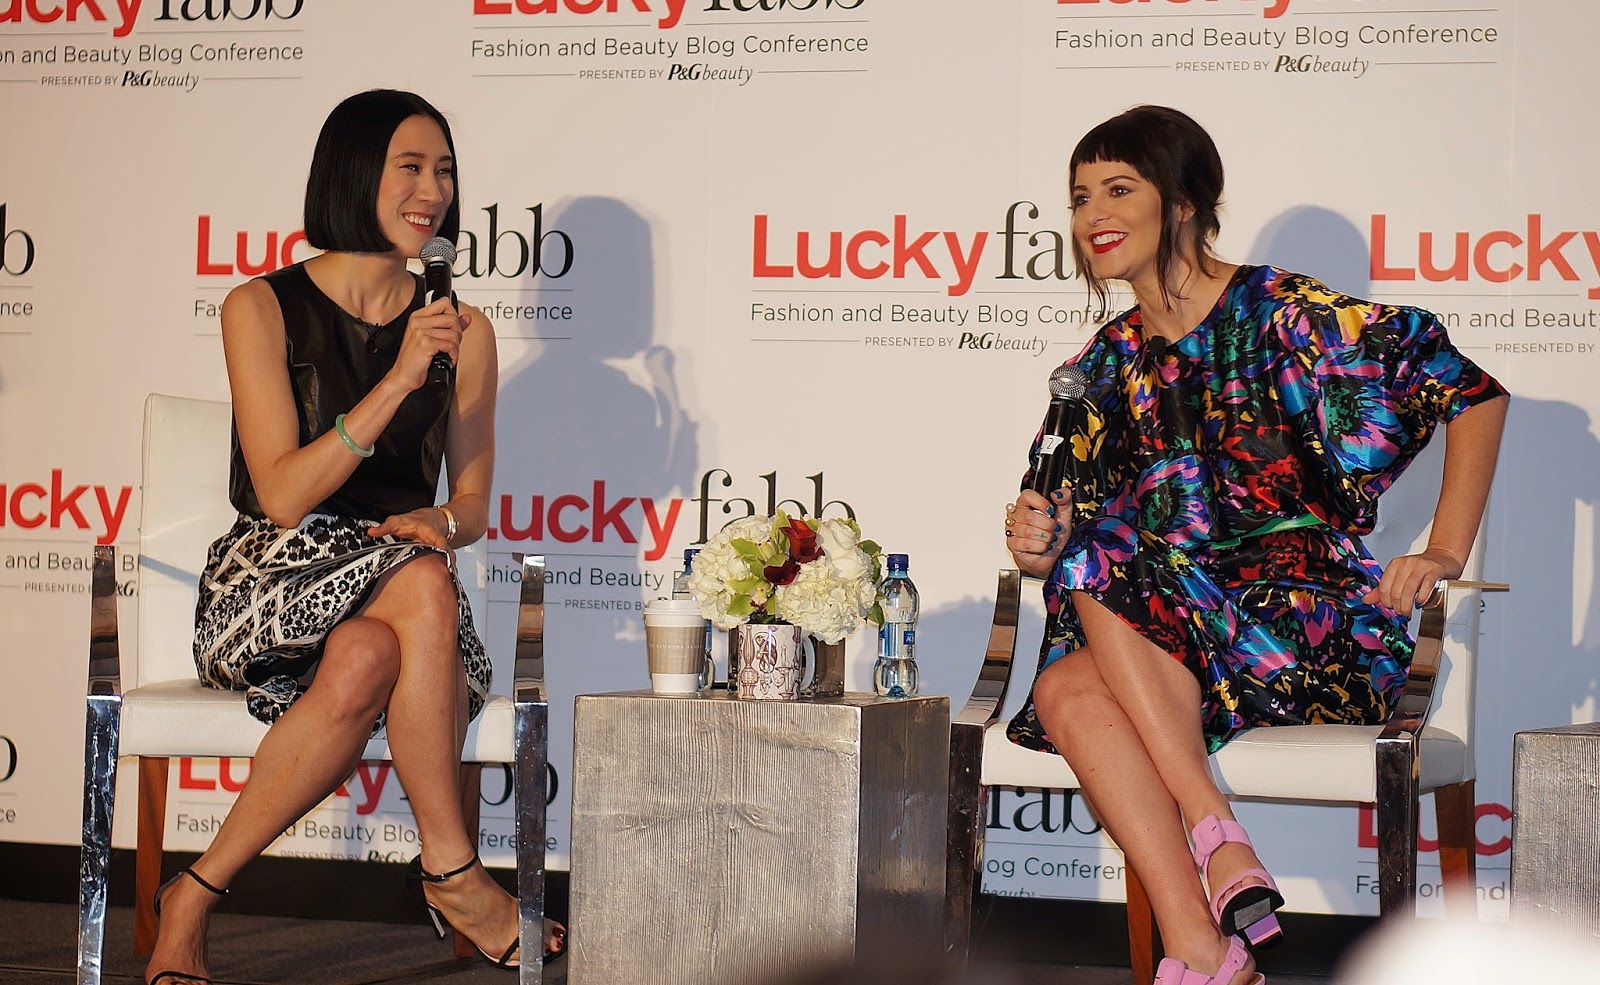 Lucky Fabb, Lucky Fabb 2014, Lucky Fabb West, Lucky Fabb L.A., Lucky Fabb Fashion and Beauty Blog Conference, Lucky Magazine Event, Fashion Blogger 